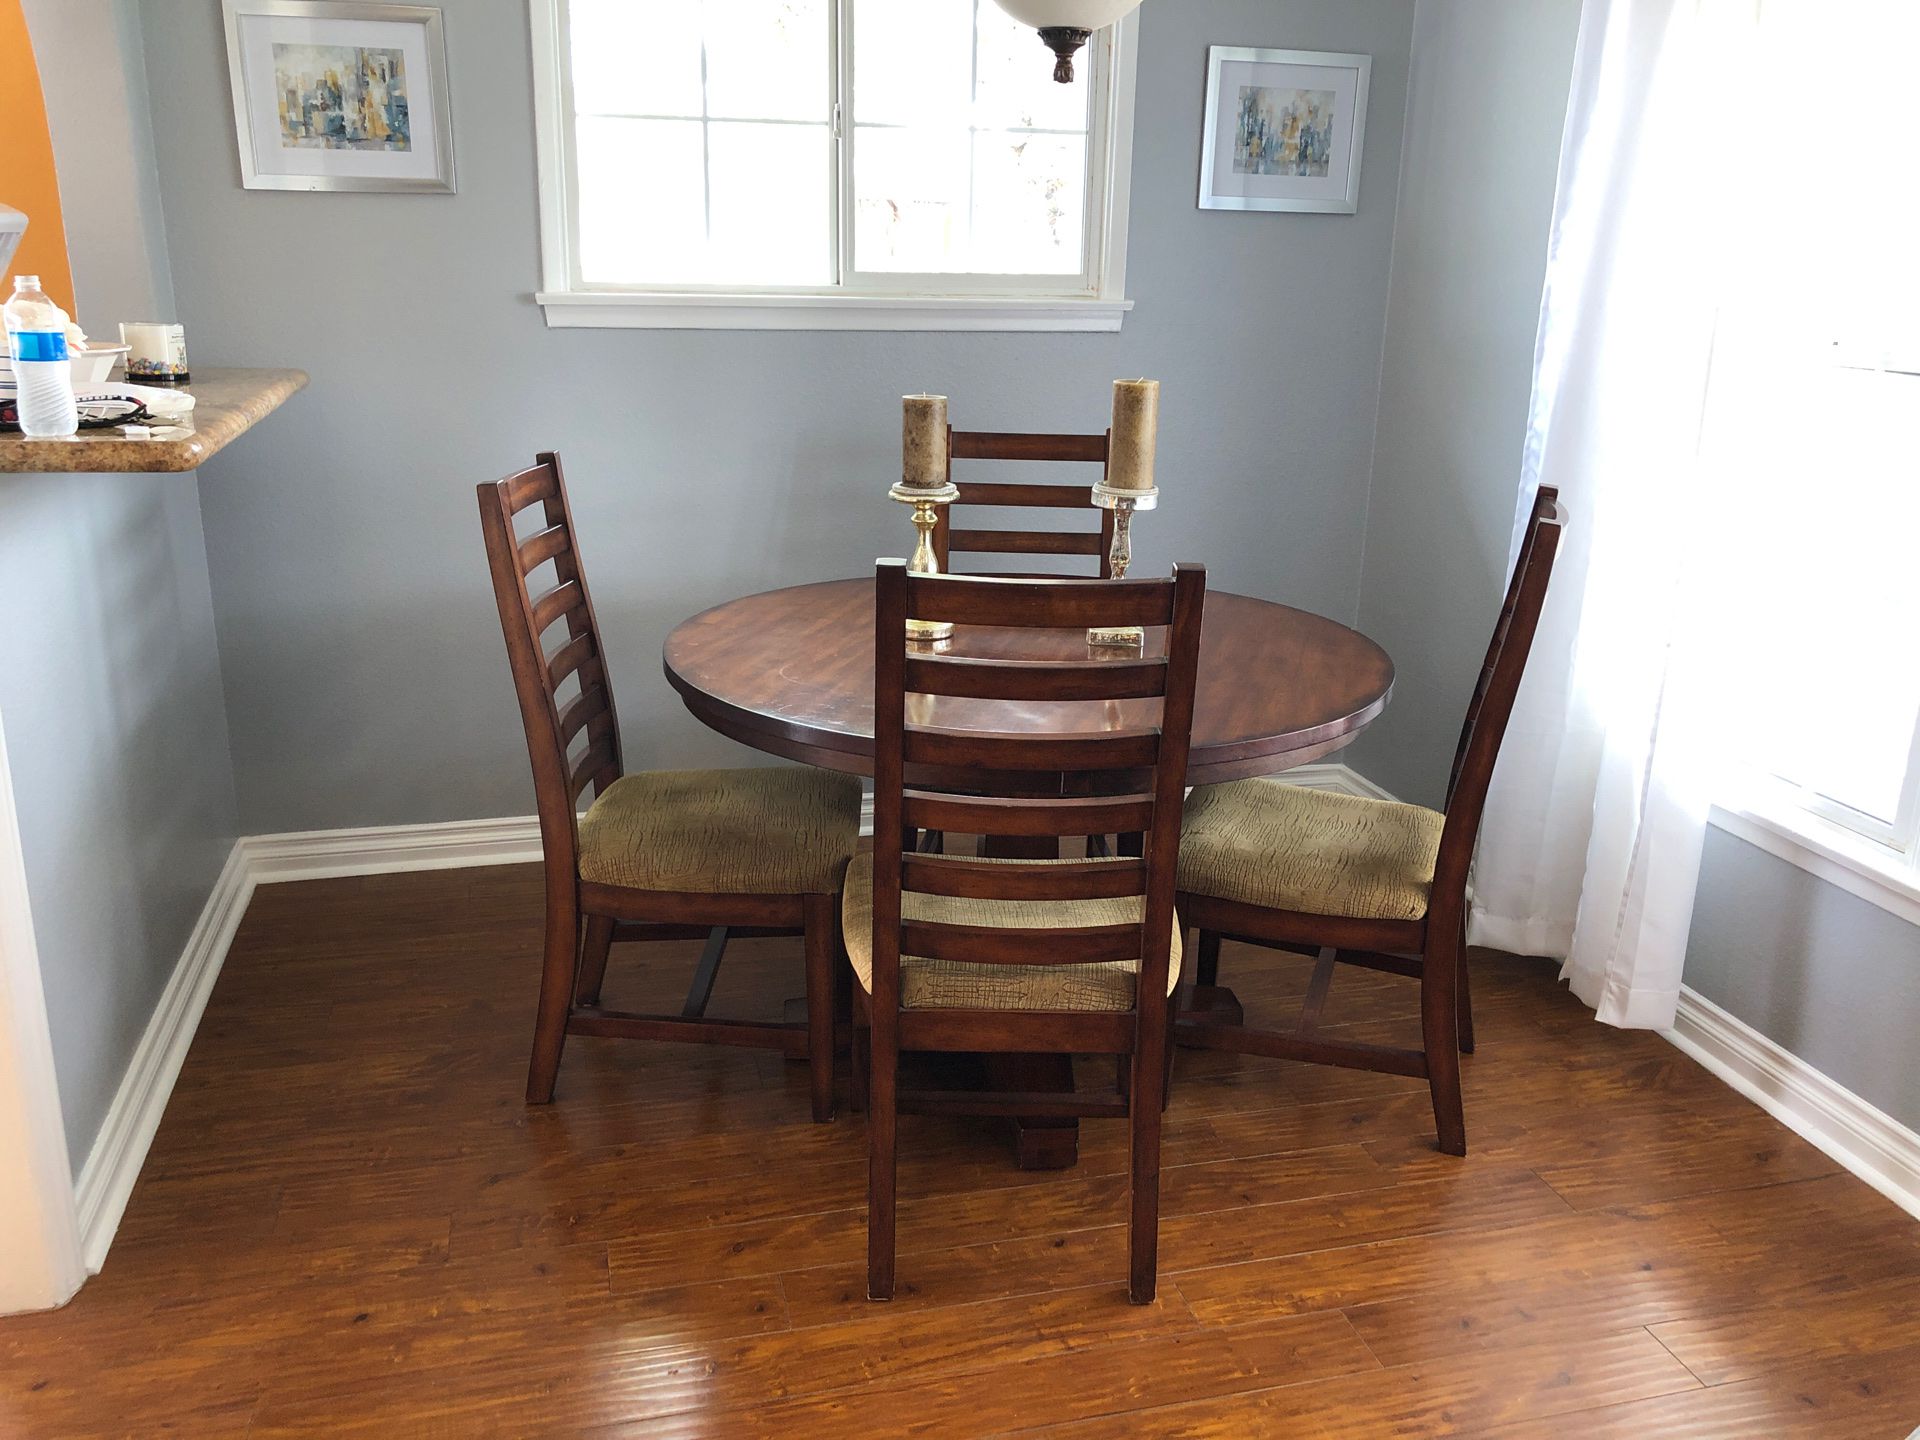 4’ Round Dinner Table with 4 Chairs in great shape